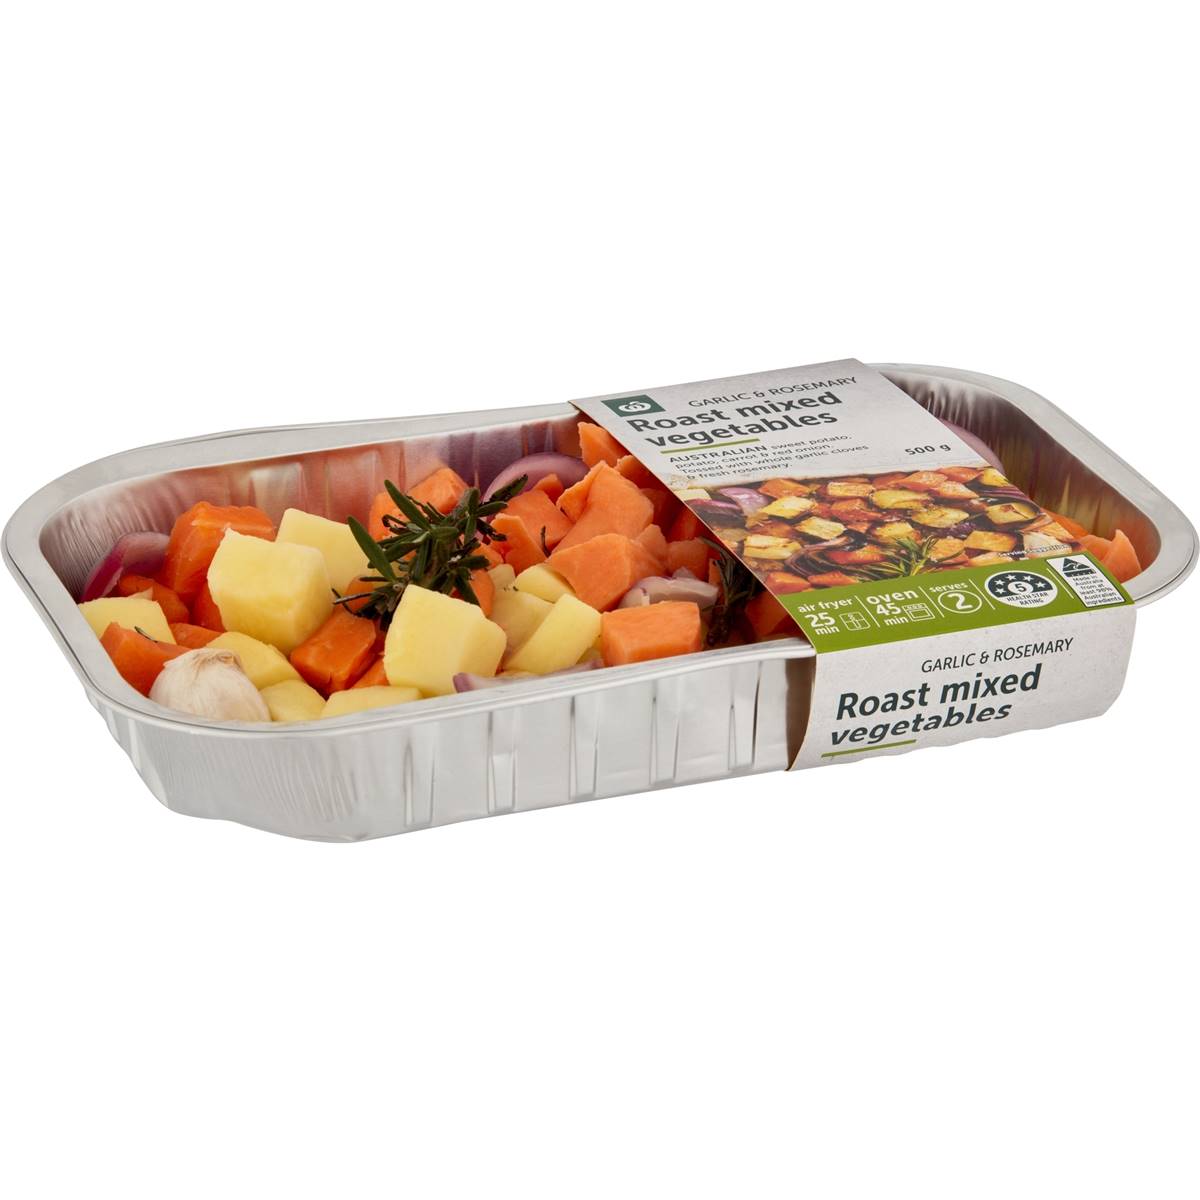 Calories in Woolworths Cook Roast Mixed Vegetables With Garlic & Rosemary